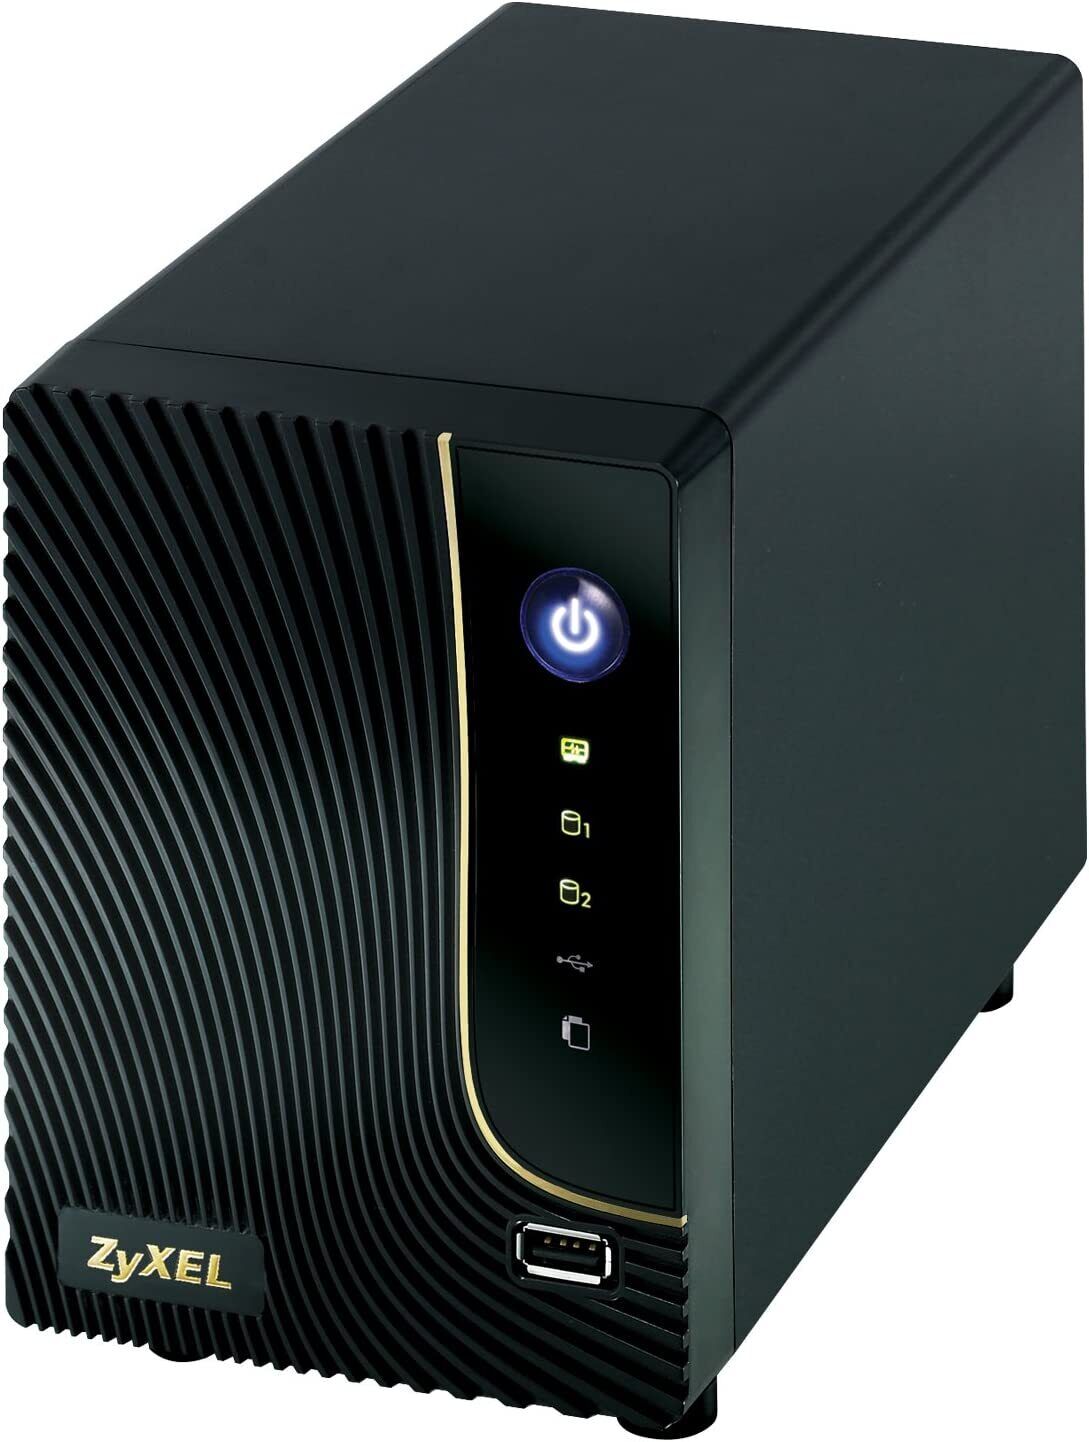 ZyXEL NSA320 High Performance 2-bay Network Attached Storage and Media Server